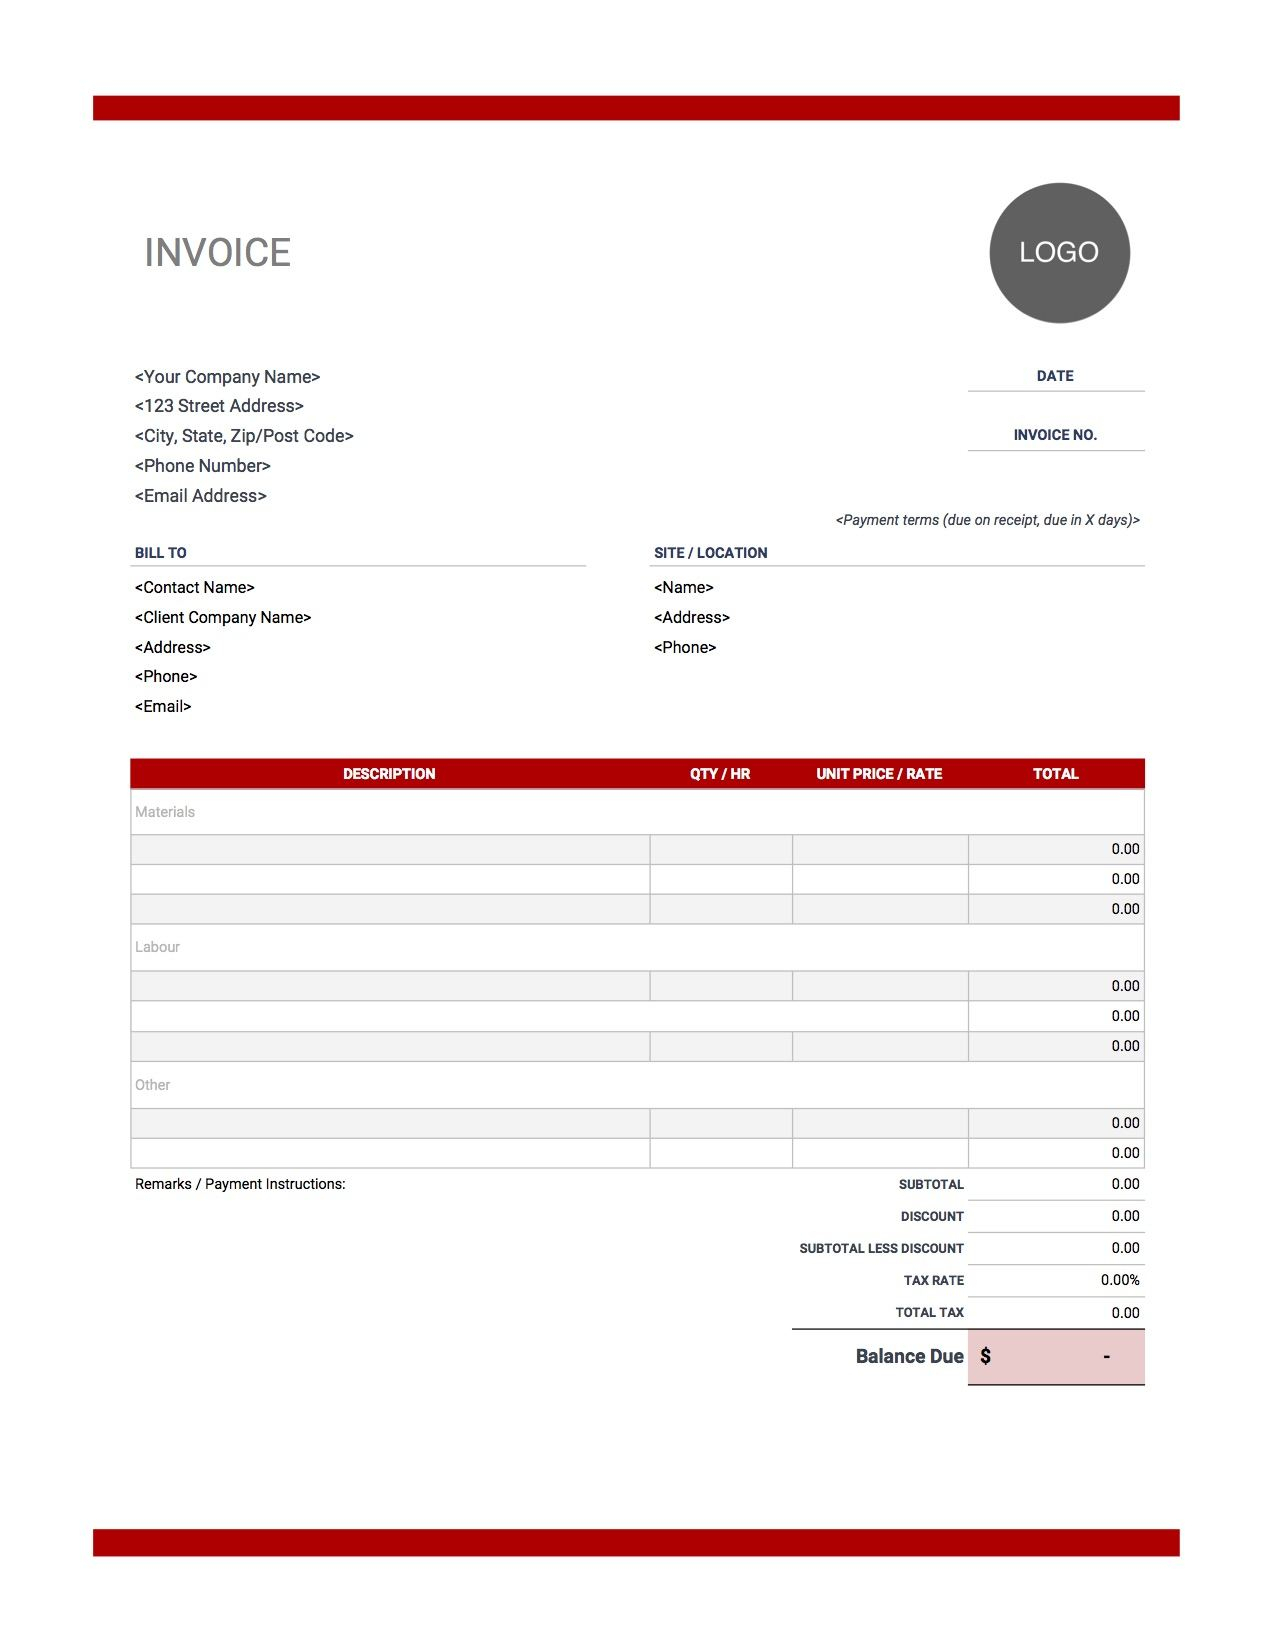 Contractor Invoice Templates | Free Download | Invoice Simple Within Invoice Template Filetype Doc